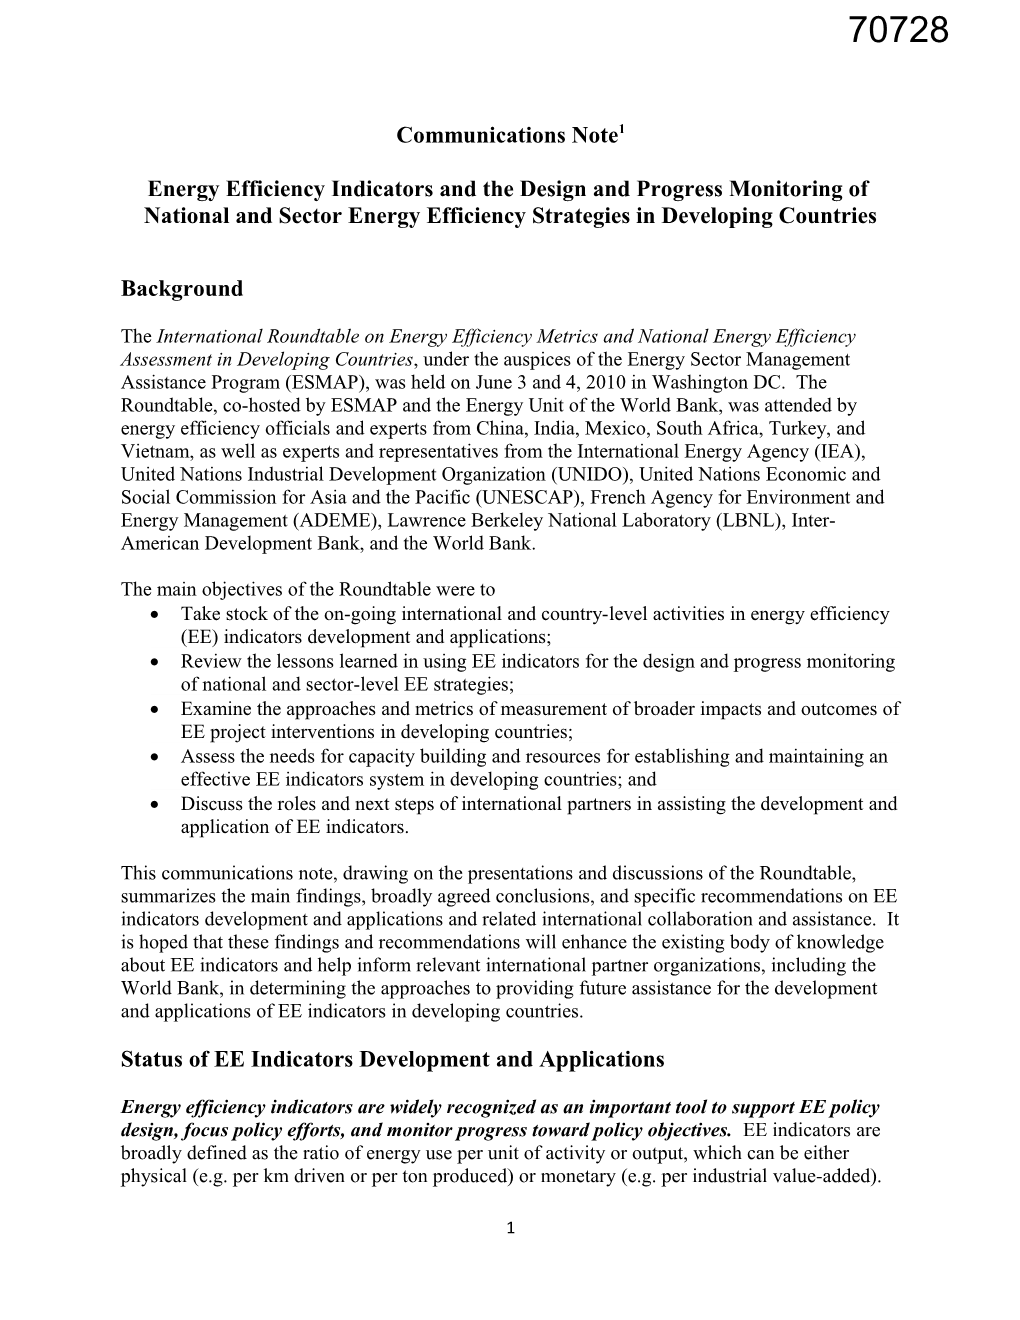 Energy Efficiency Indicators and the Design and Progress Monitoring Of